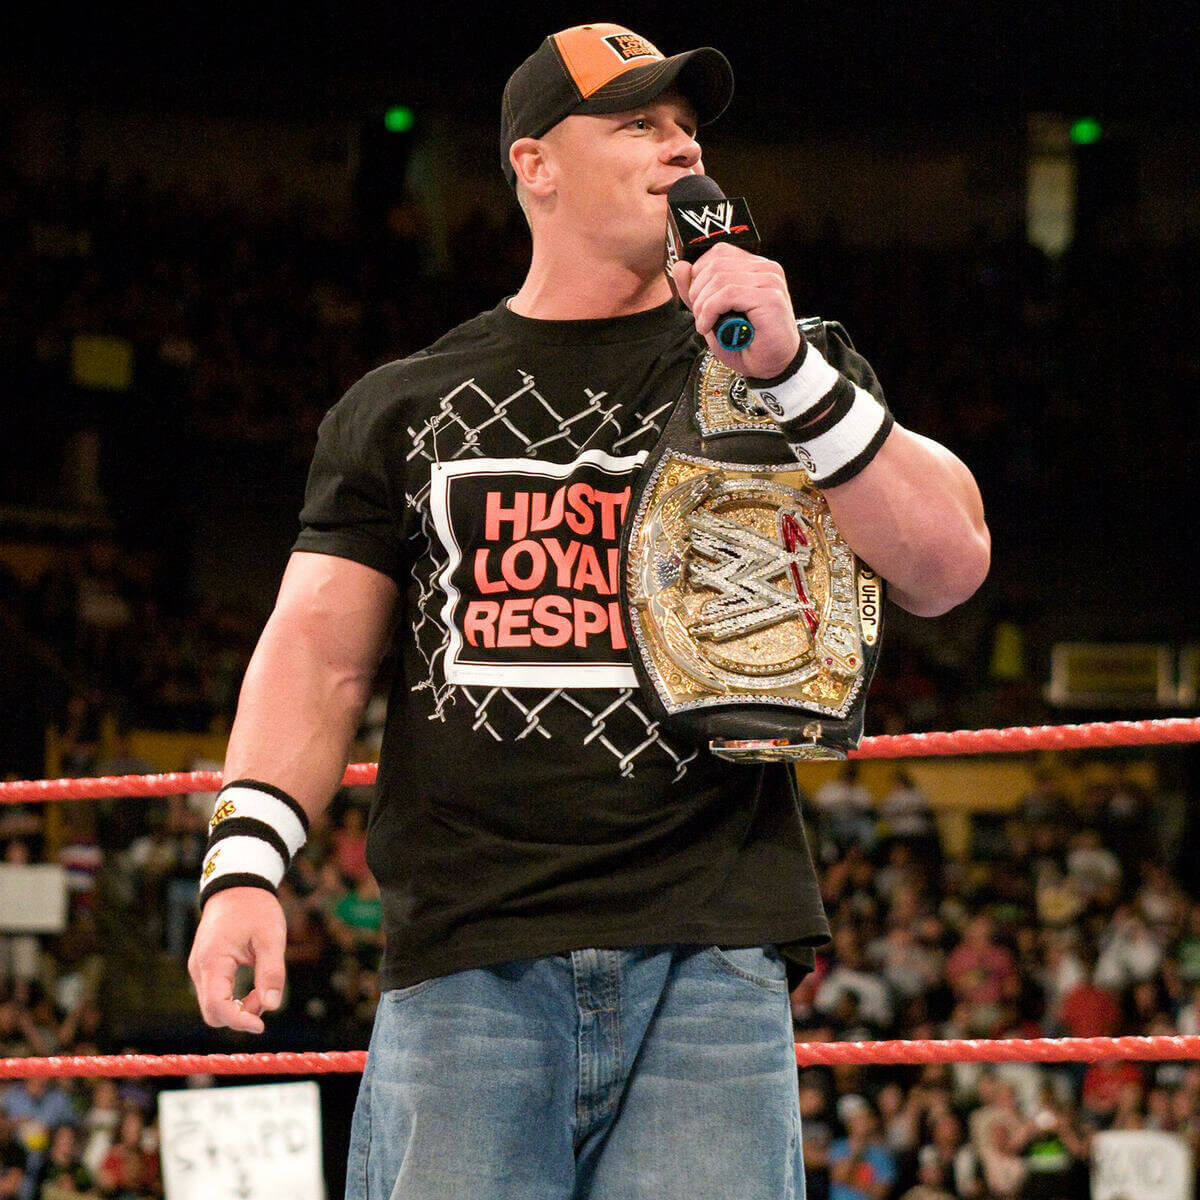 John Cena talking on mic in a boxing ring holding a champion belt. 